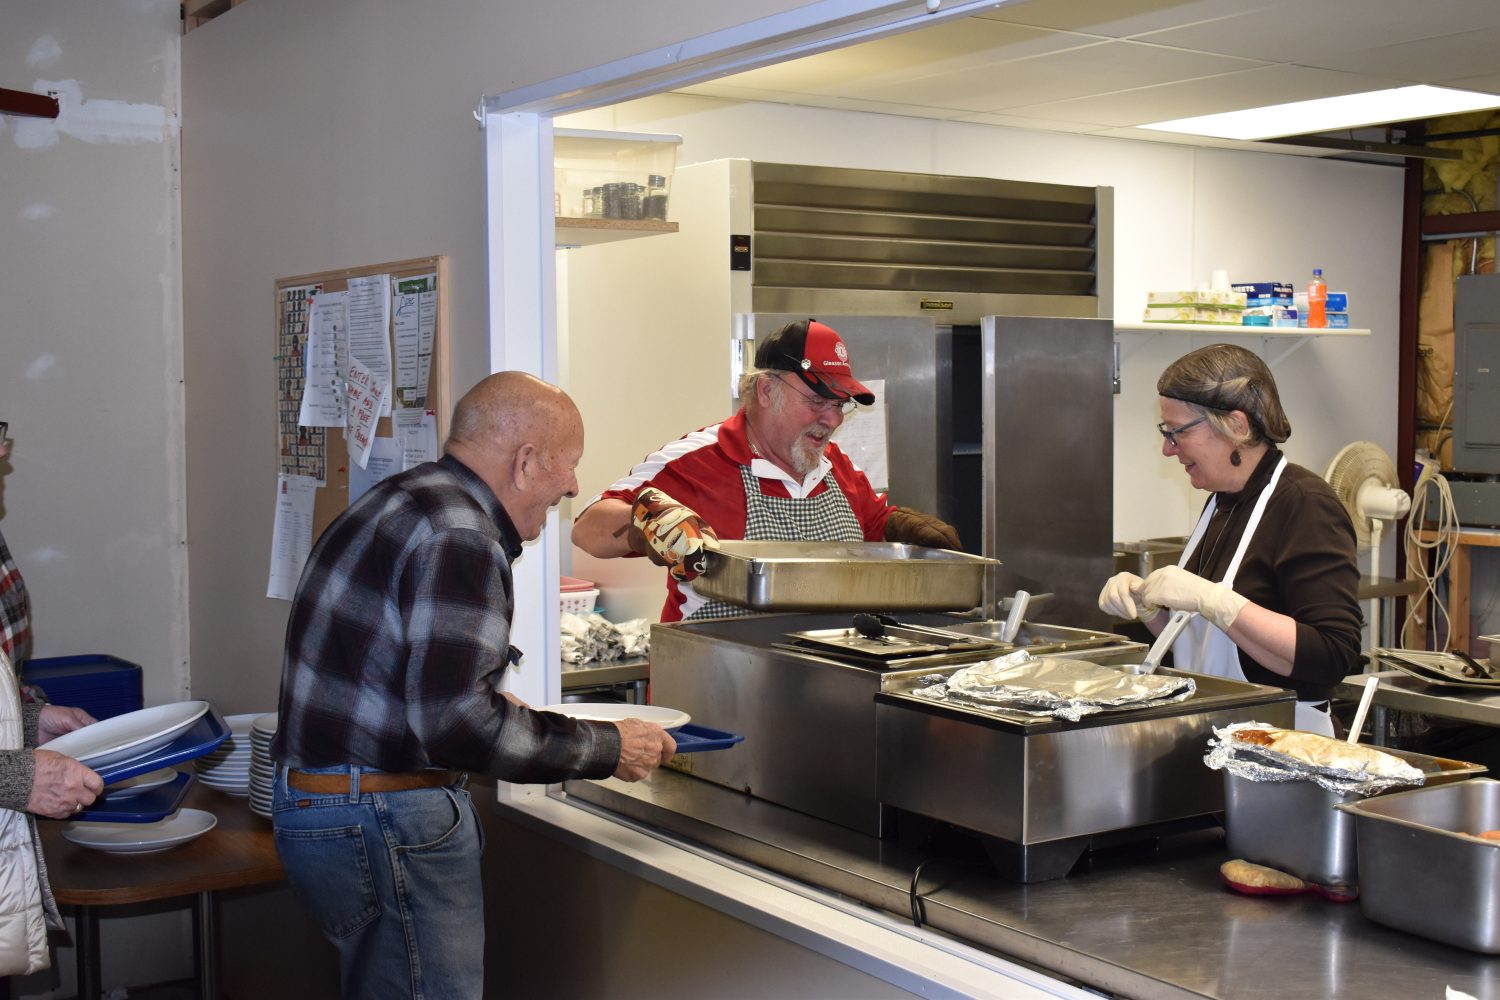 ADRC, Gleason Lion’s Club team up to provide monthly lunch